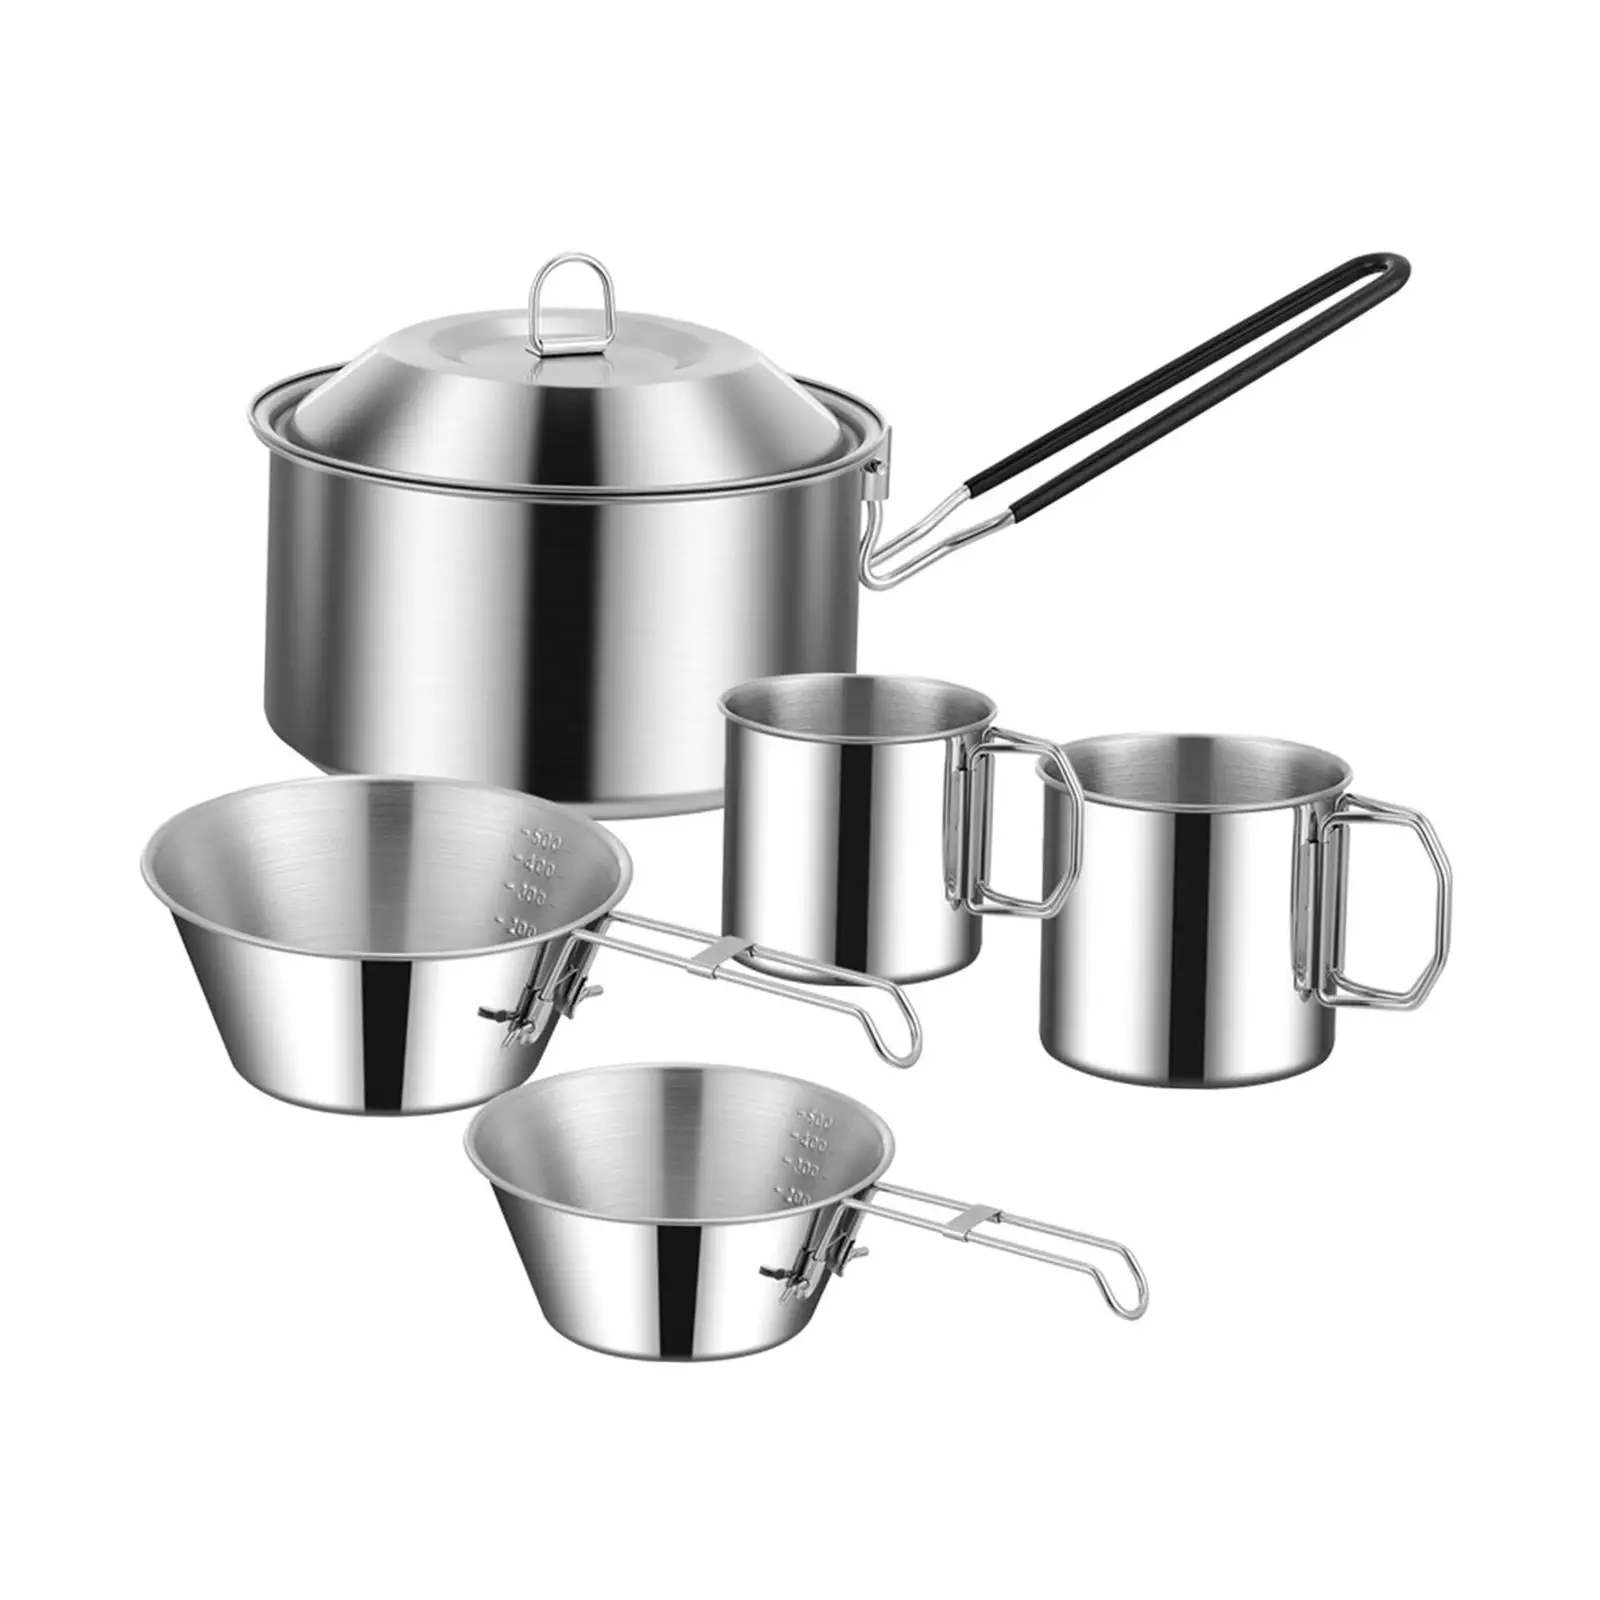 Stainless Steel Cooking Pot Set Camping Foldable Tableware for BBQ Accessories Barbecue